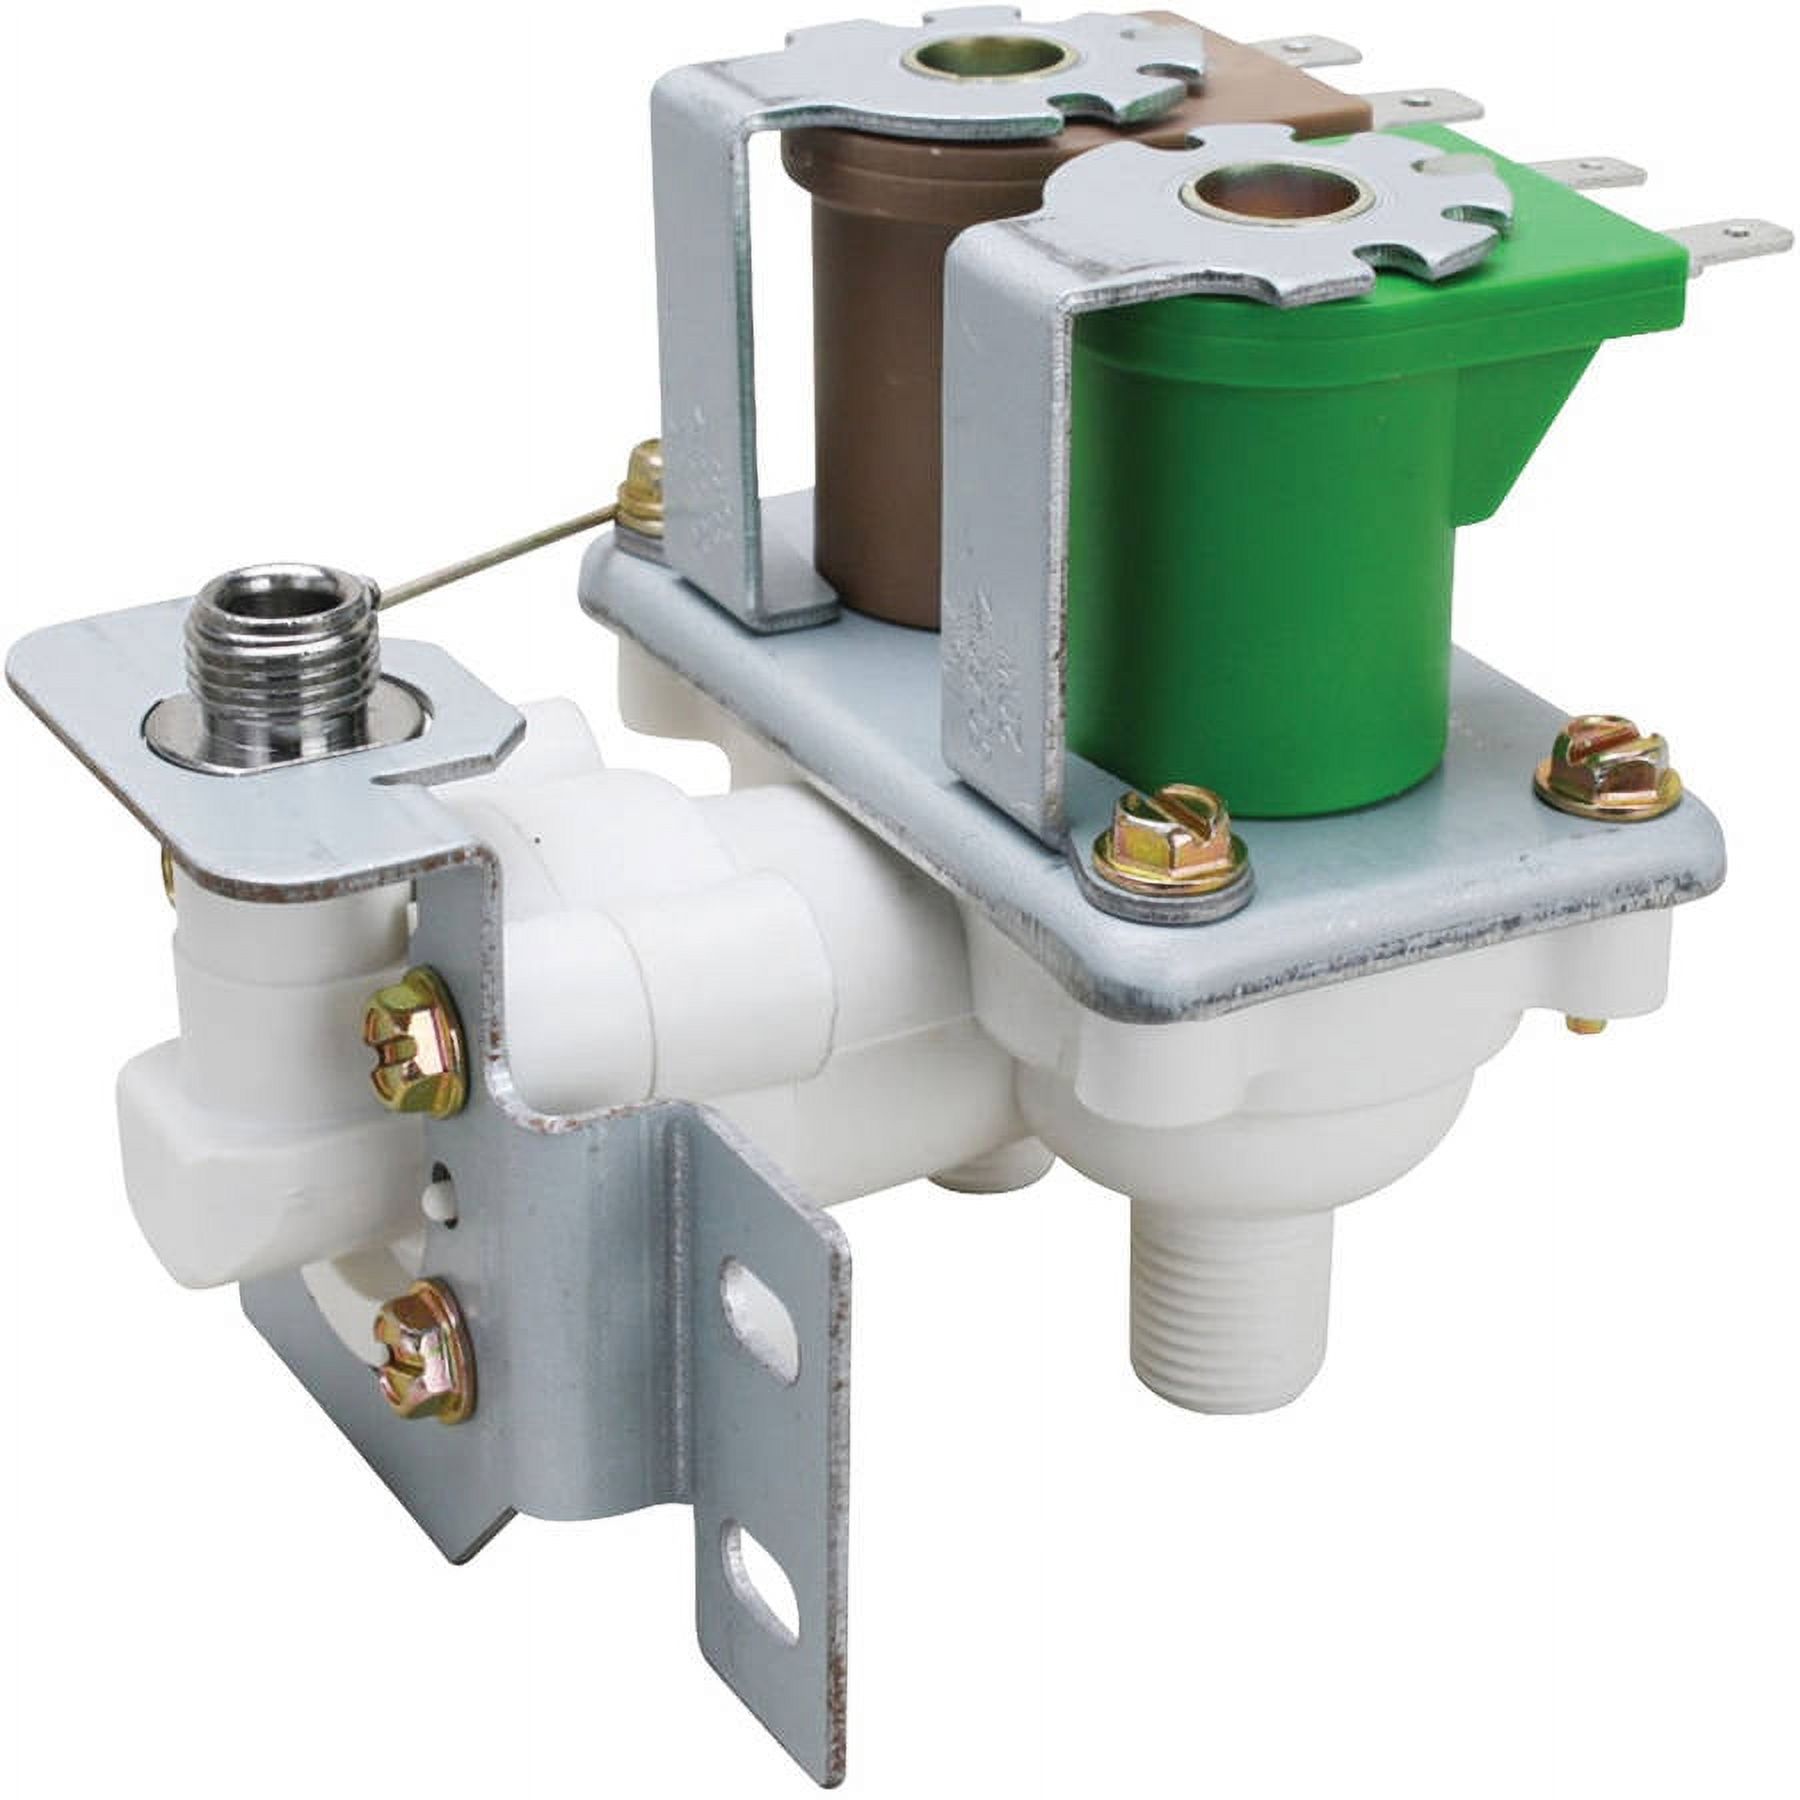 ERP 4318046 Refrigerator Water Valve (Replacement for Whirlpool 4318046) - image 1 of 6